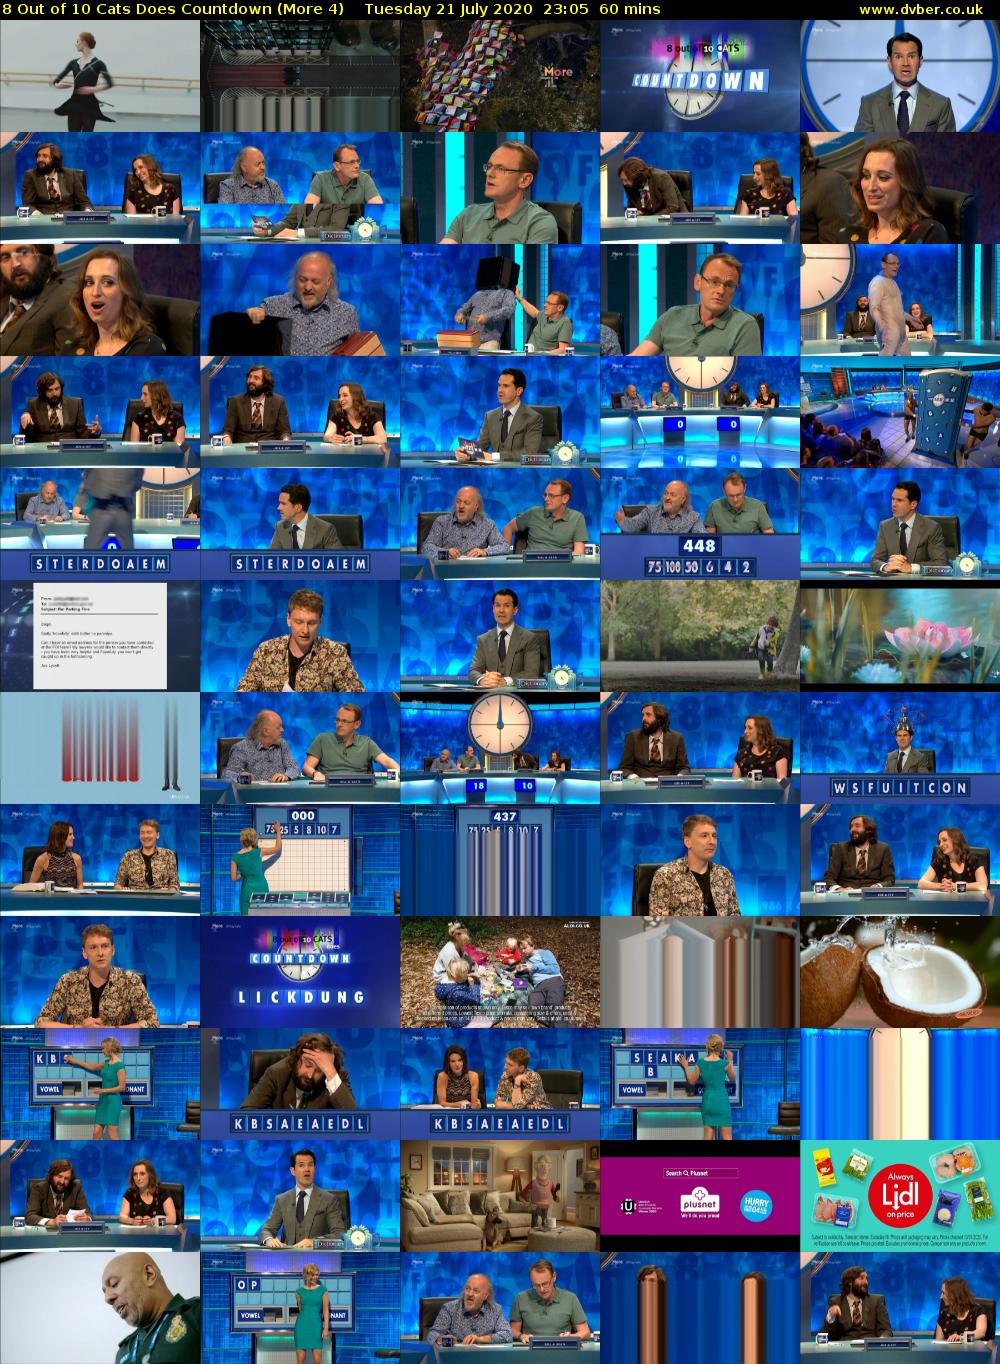 8 Out of 10 Cats Does Countdown (More 4) Tuesday 21 July 2020 23:05 - 00:05